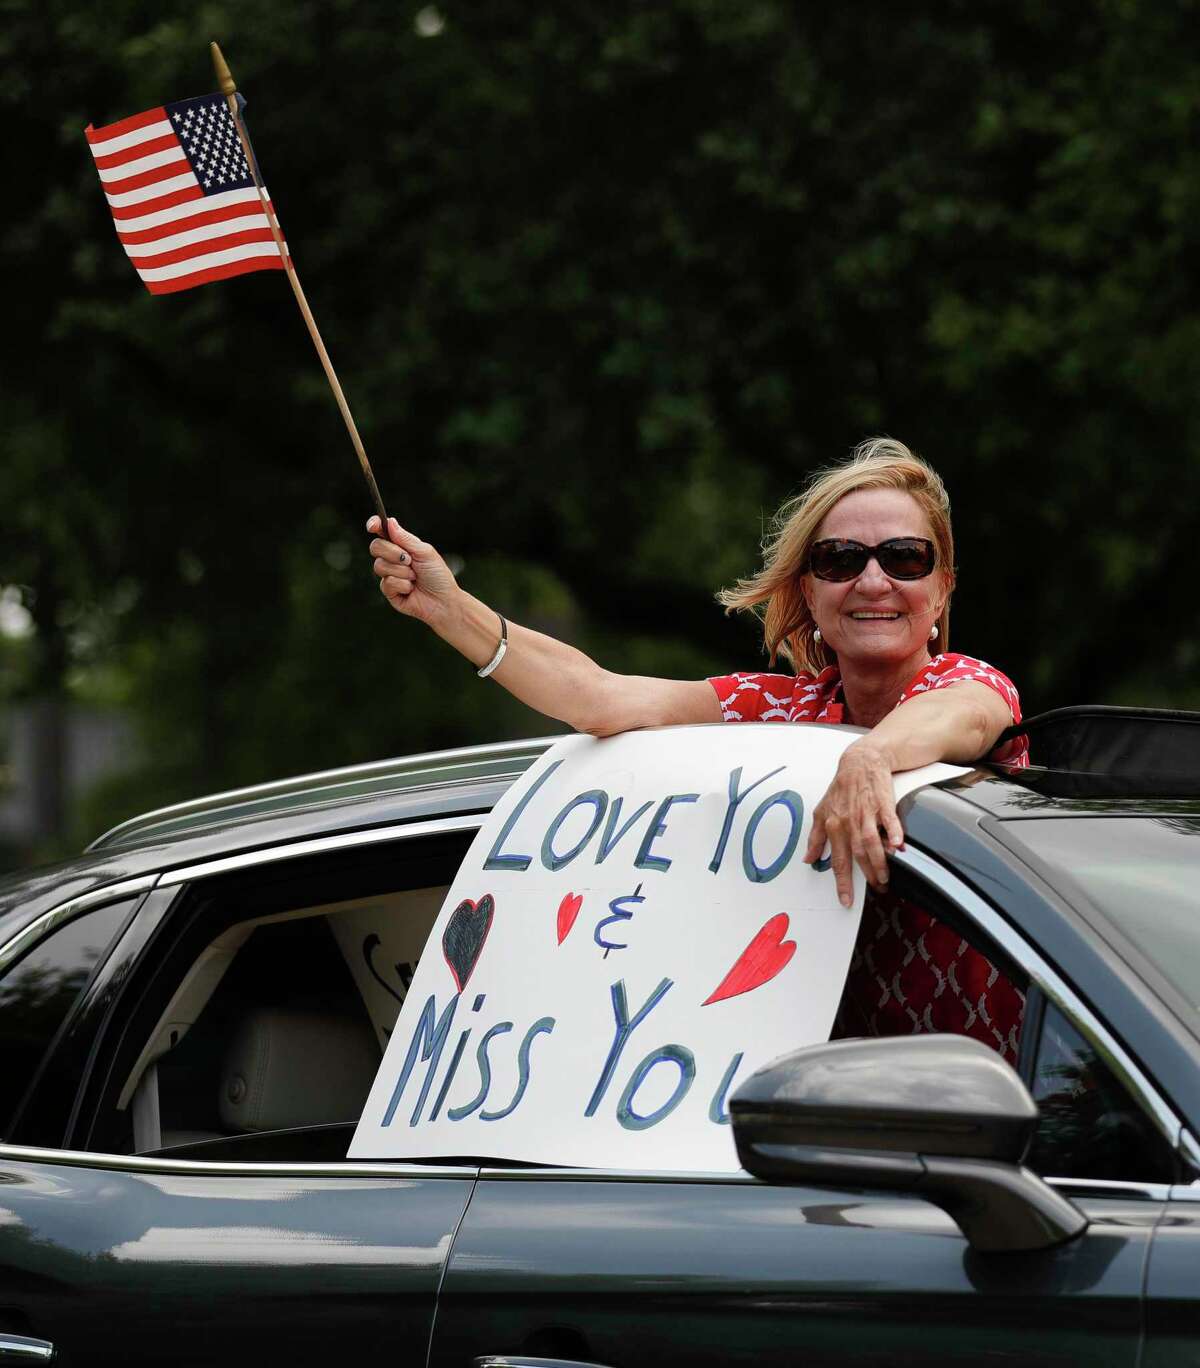 Cars pass by residents of the Carriage Inn Conroe assisted living facility as they take in a parade from friends, family and other community members, Friday, April 3, 2020, in Conroe.